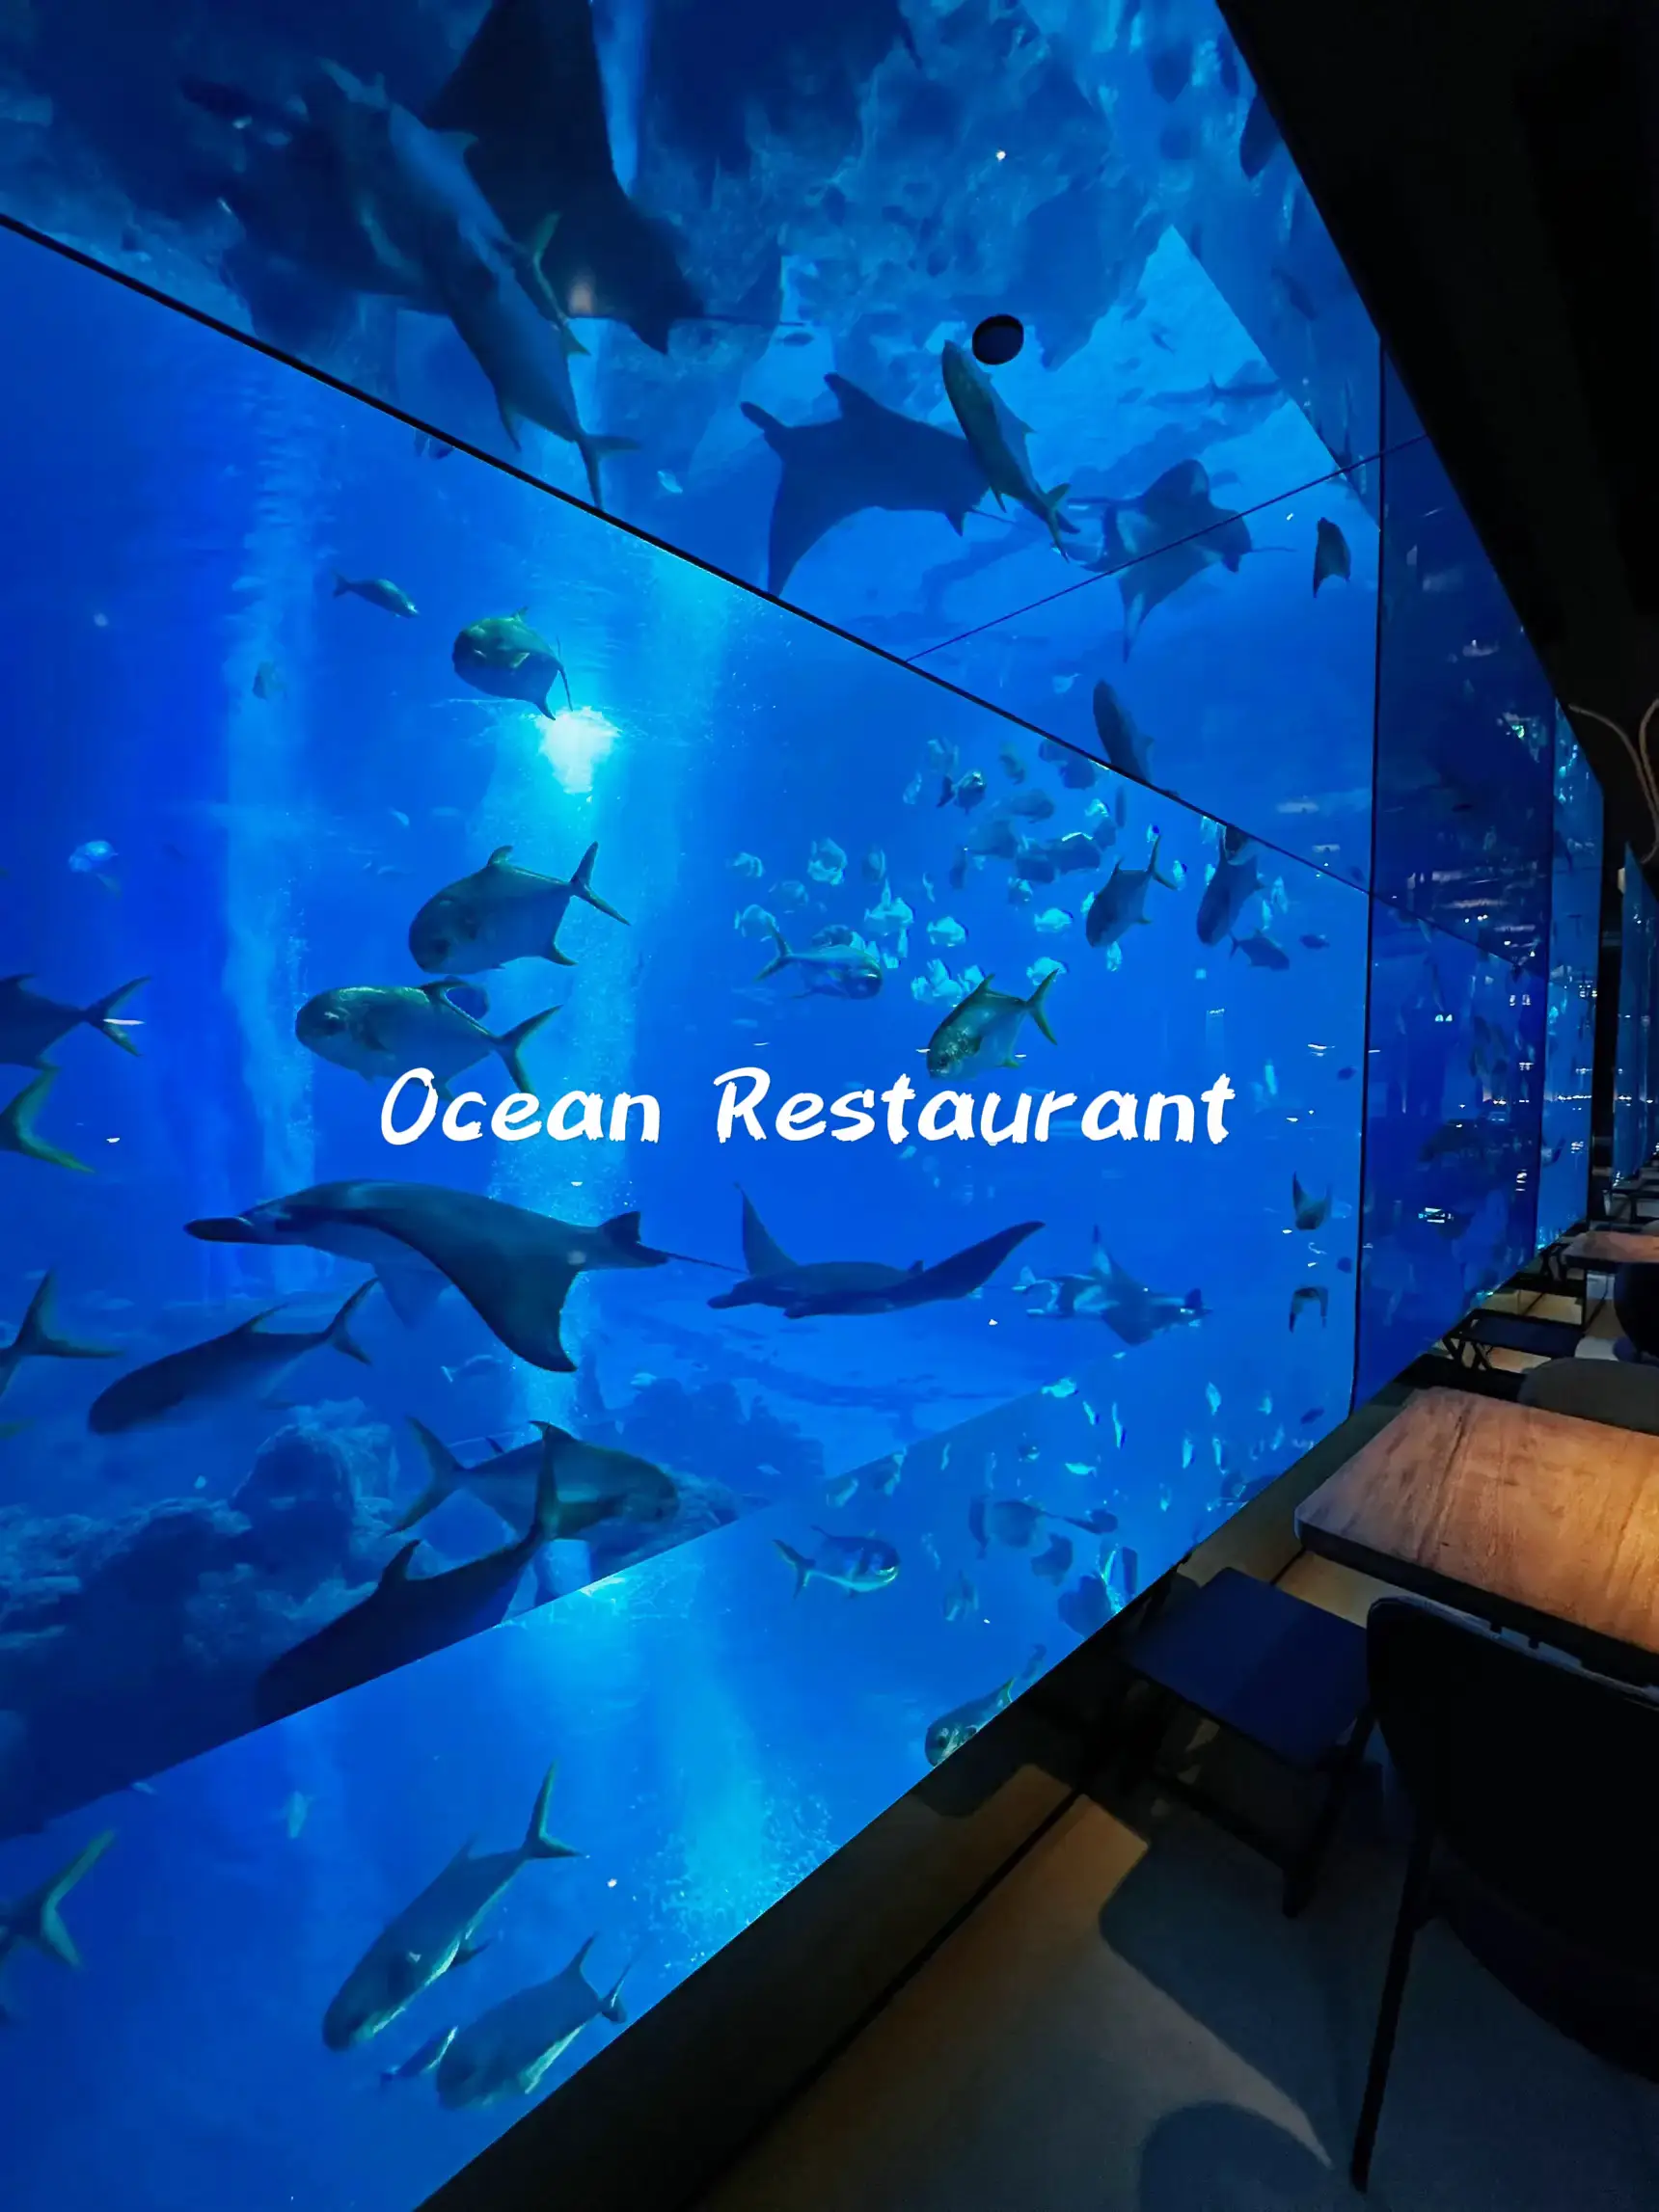 Restaurant with the best view 🐠's images